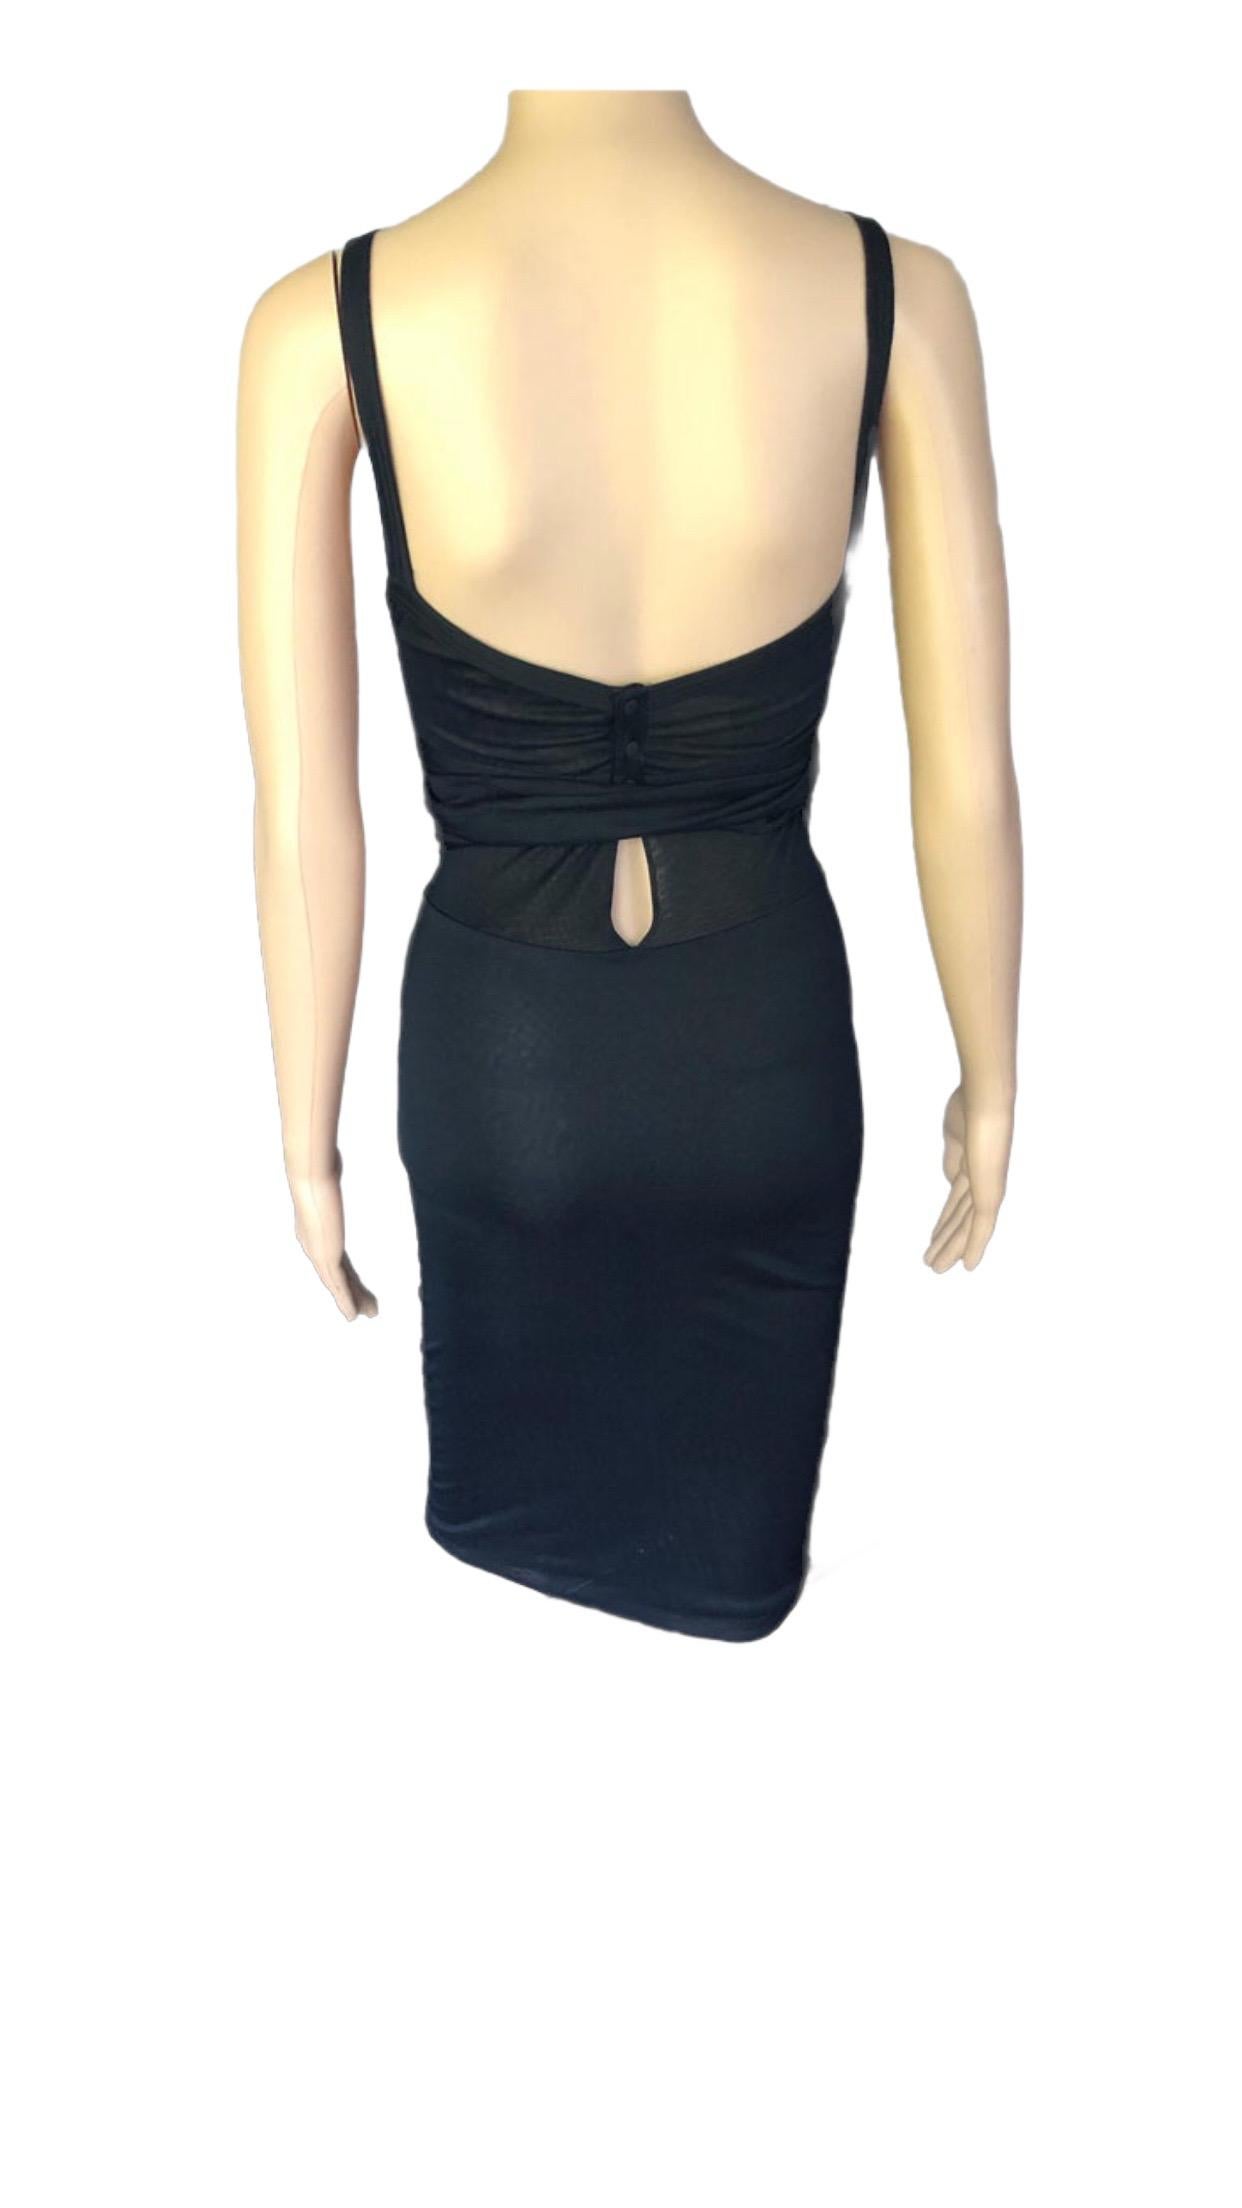 1990'S Gucci by Tom Ford Semi-Sheer Knit Bodycon Black Dress 1